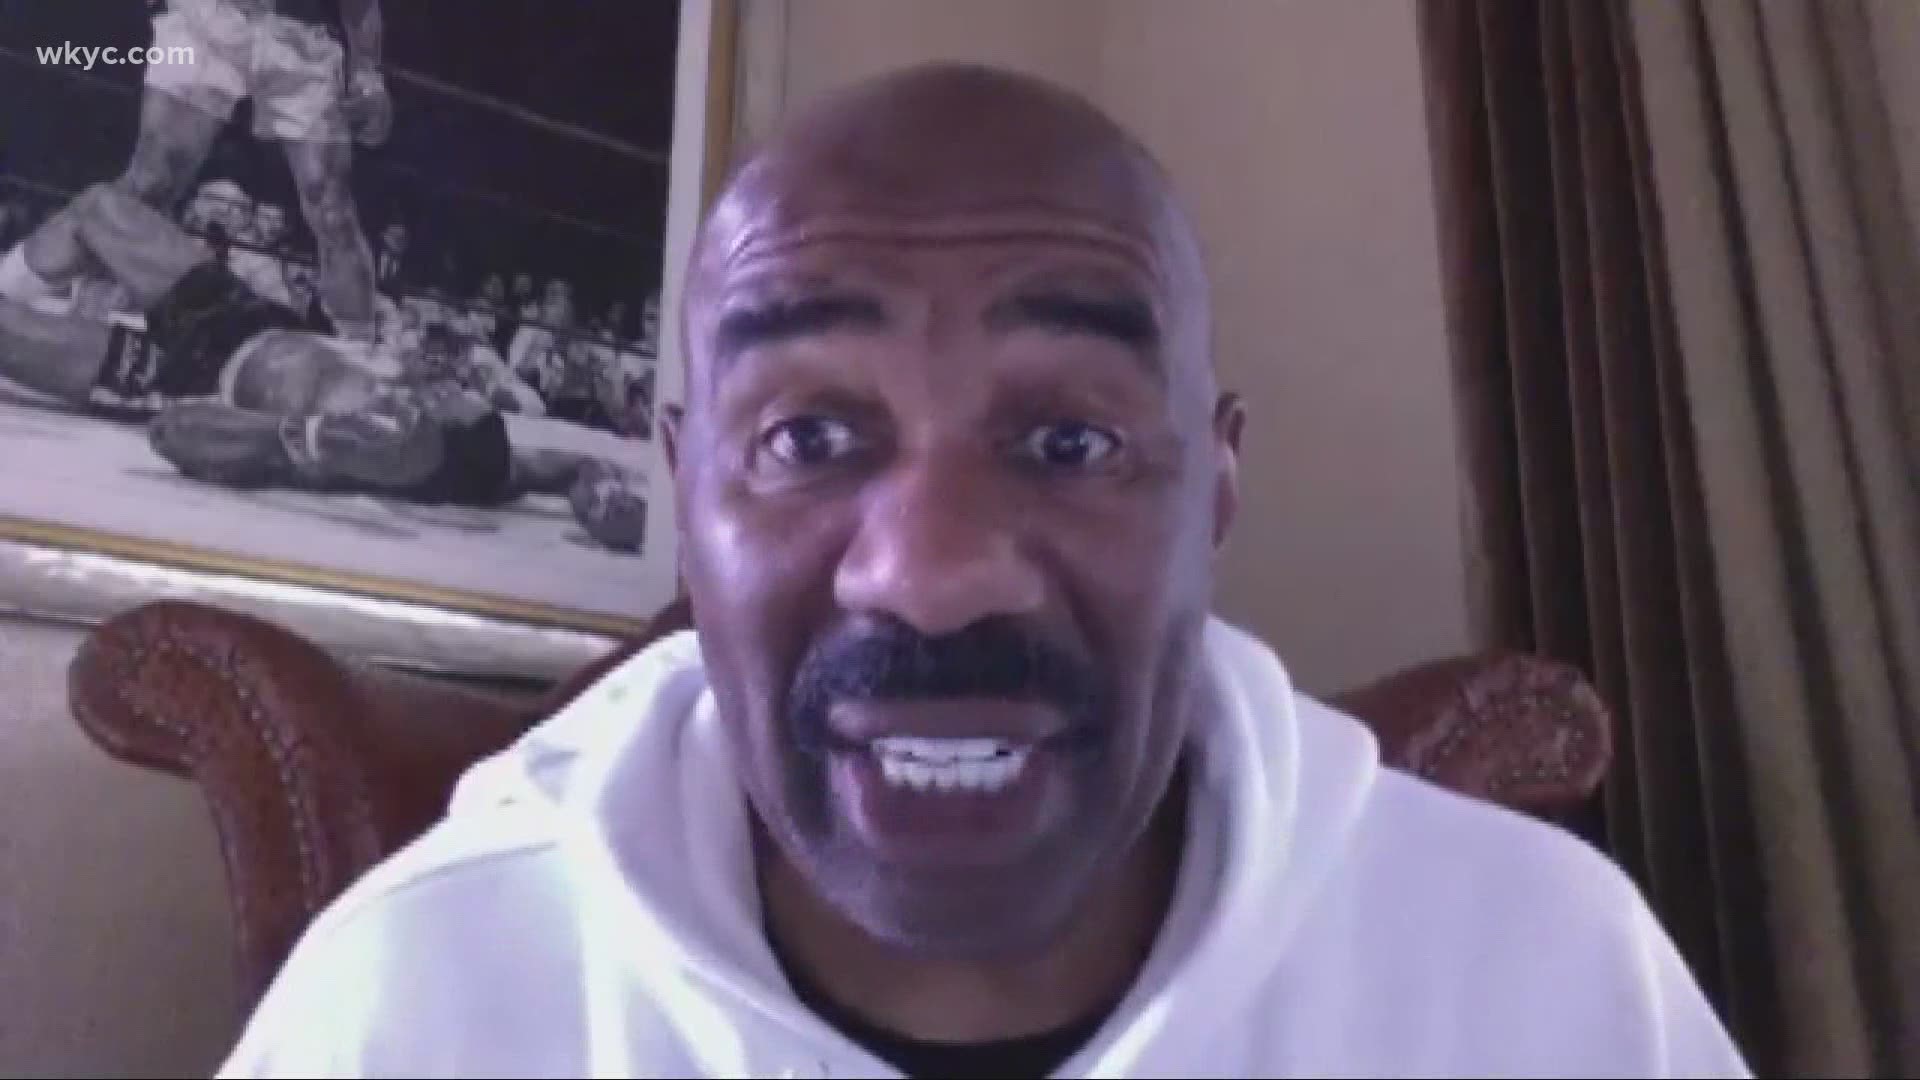 3News' Russ Mitchell talks with the Cleveland native  Steve Harvey about how he's handling quarantine and what's doing to stay busy. Plus his love of Cleveland!